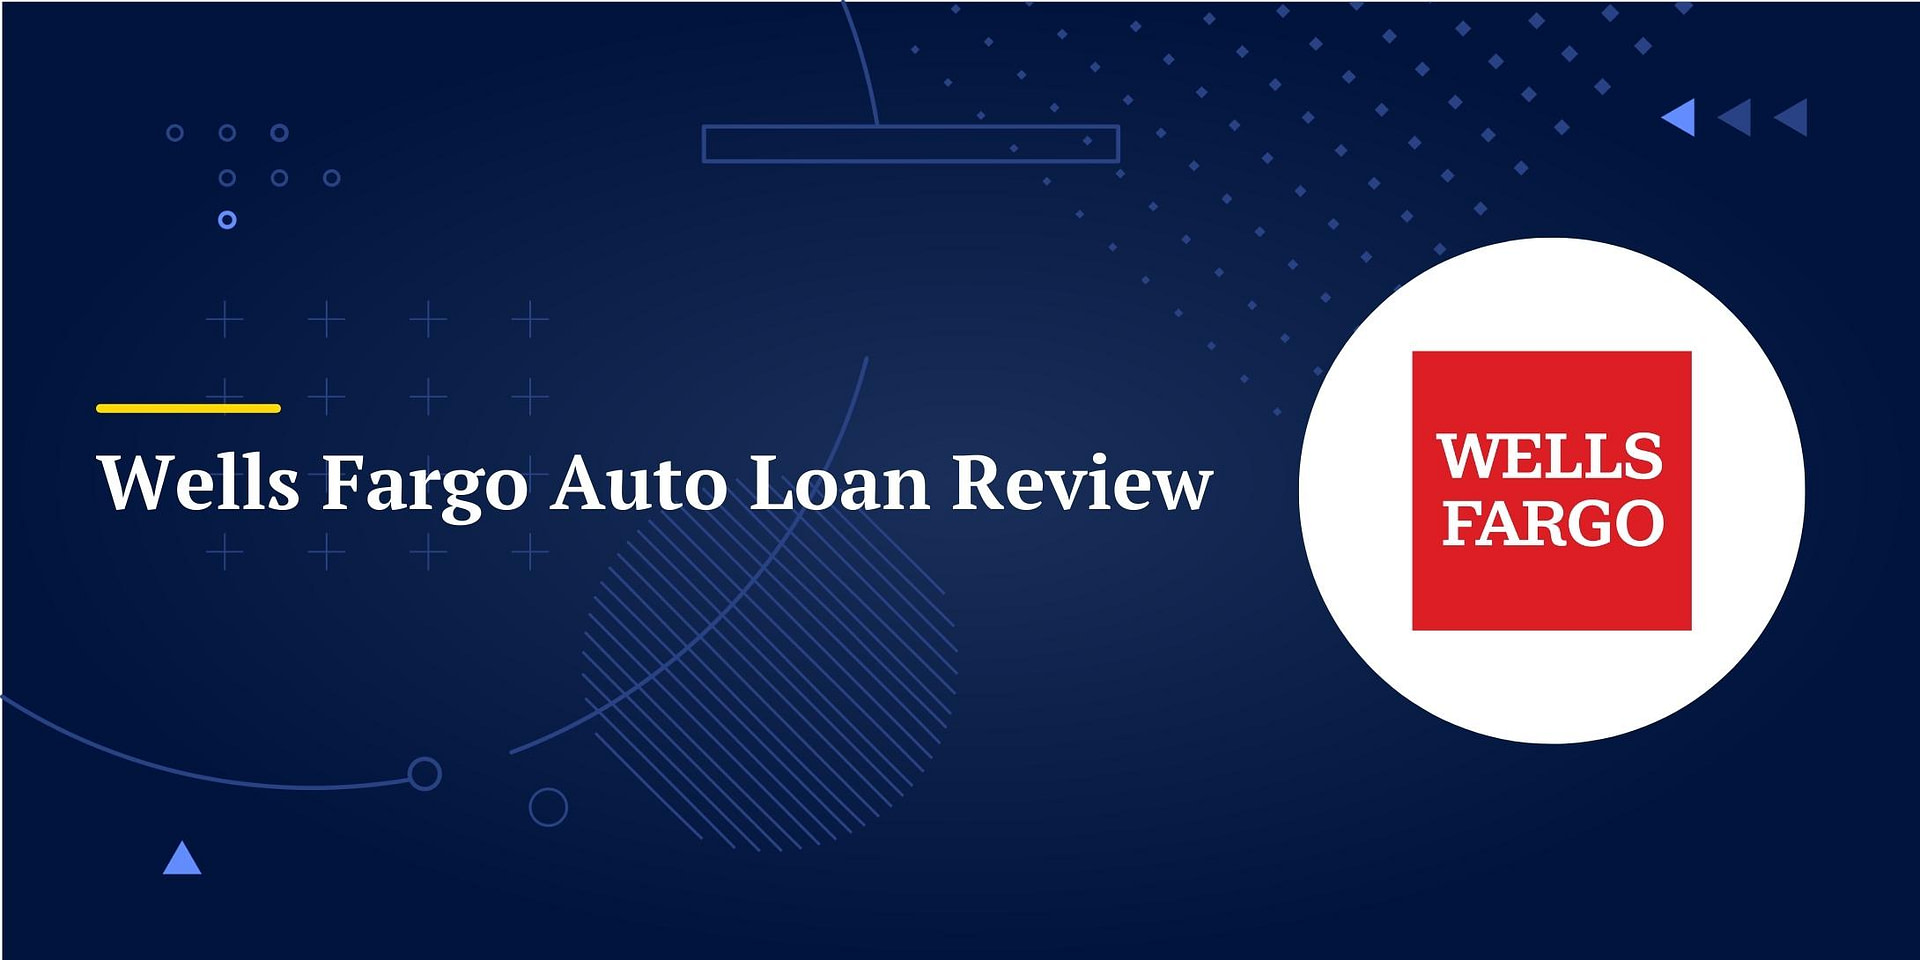 warning-government-action-wells-fargo-auto-loan-review-2022